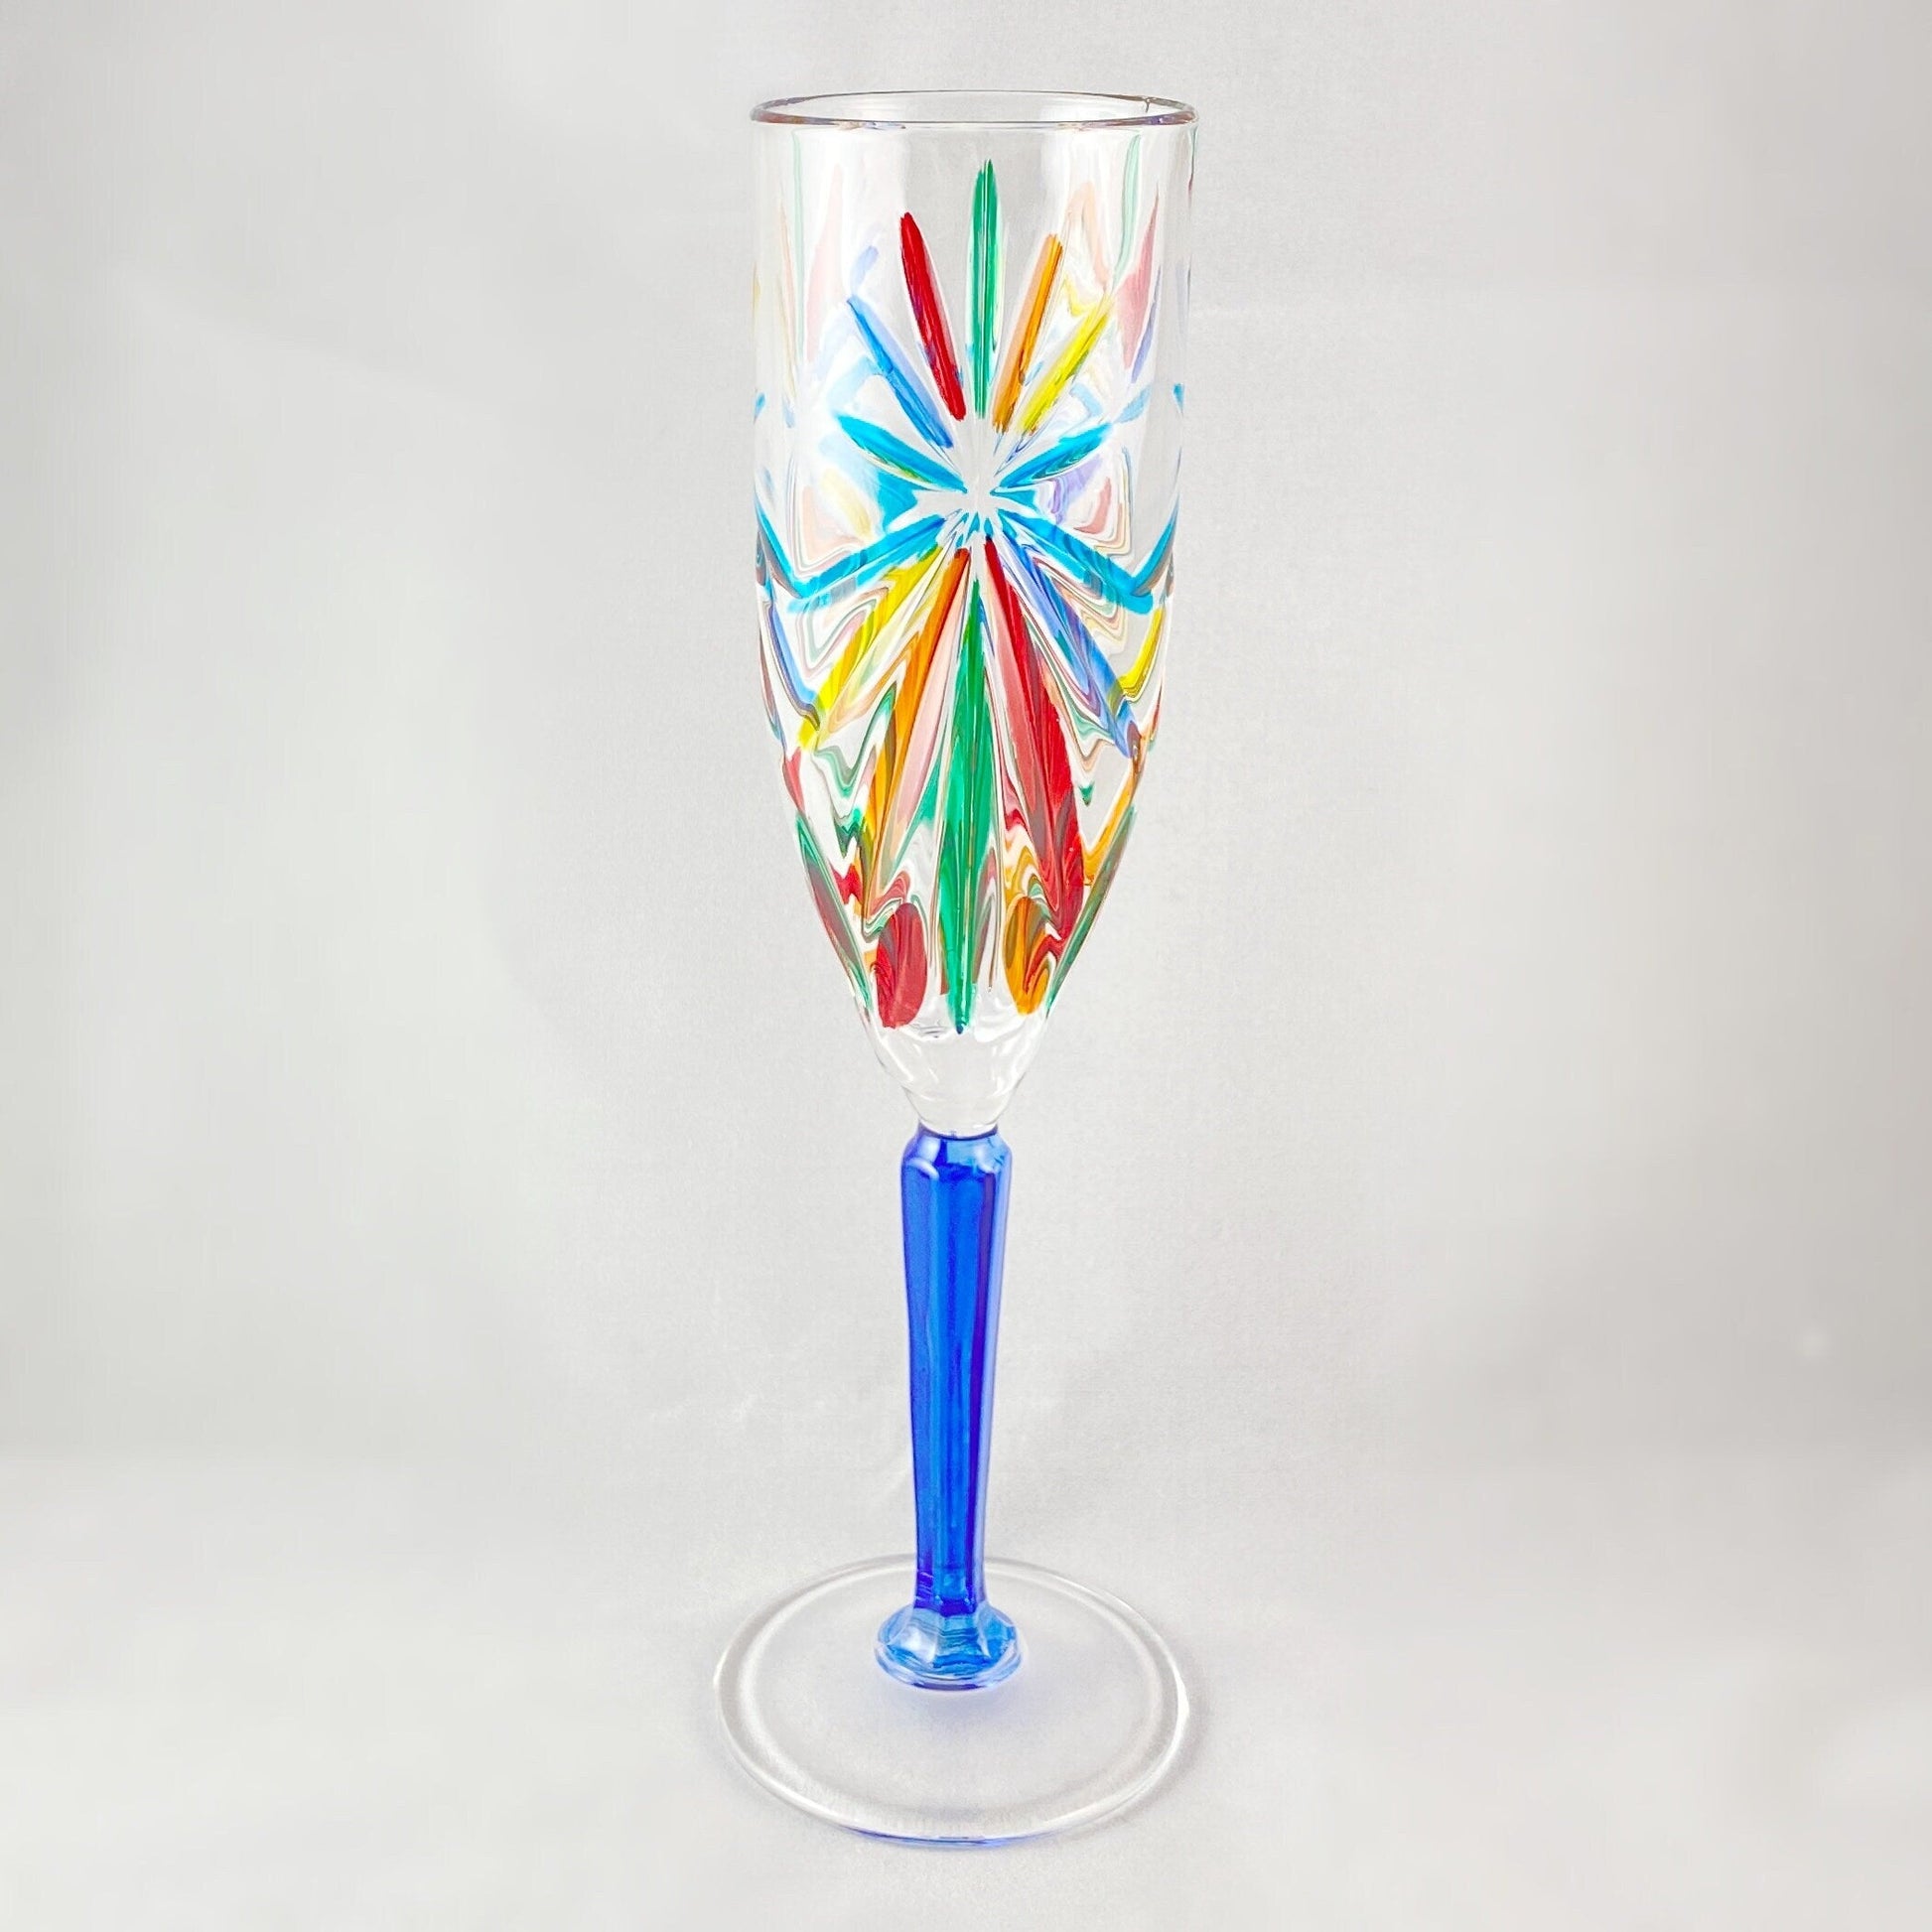 Blue Stem Oasis Venetian Glass Champagne Flute  - Handmade in Italy, Colorful Murano Glass